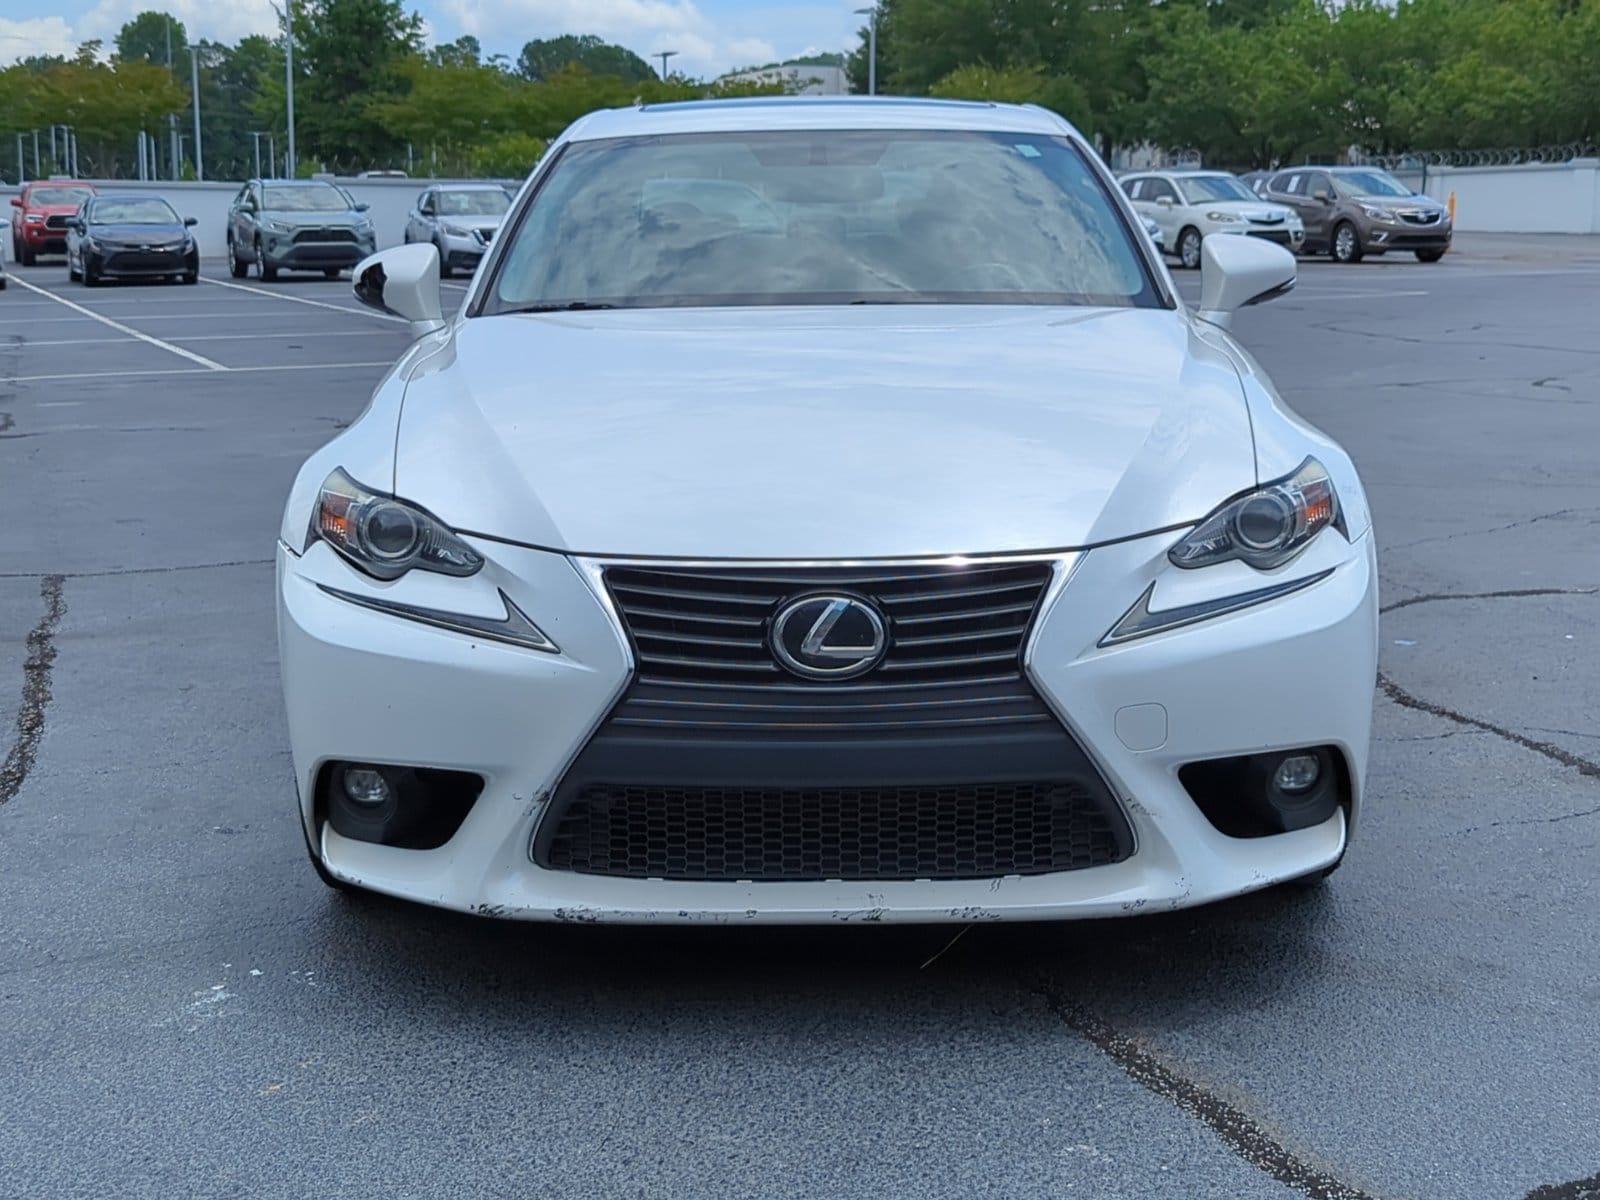 Used 2016 Lexus IS 200t with VIN JTHBA1D21G5010362 for sale in Lithia Springs, GA